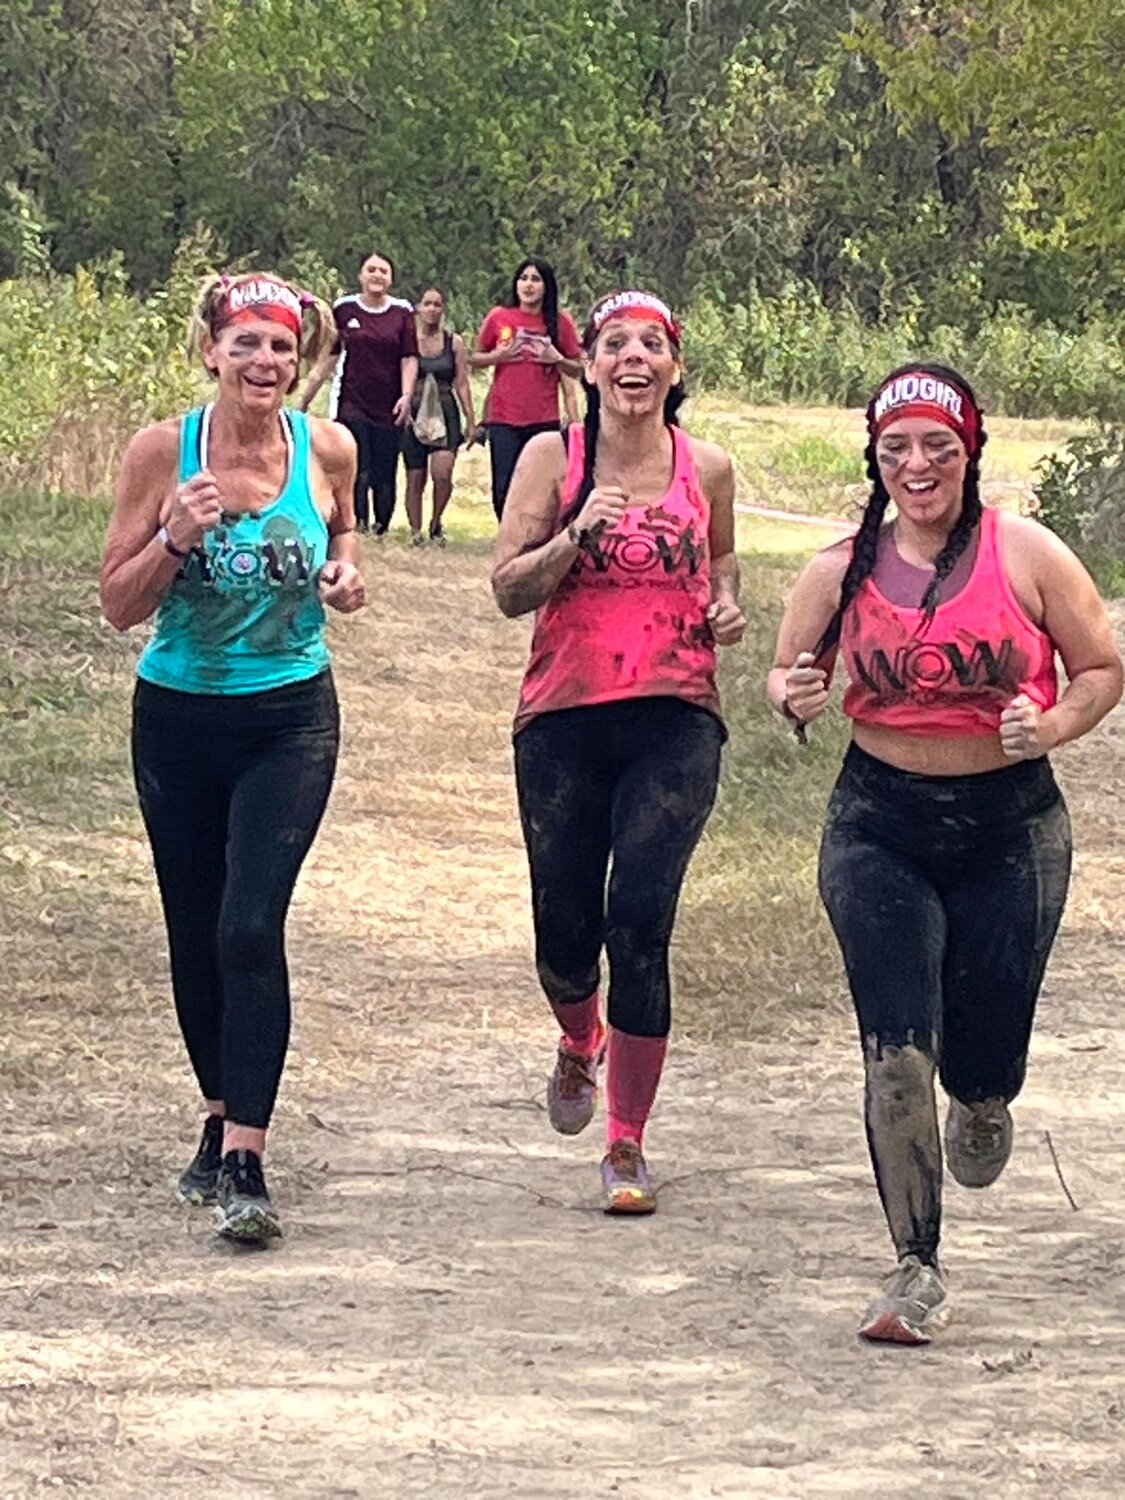 The Hood County workout group, Women of Wisdom, had to complete a three-mile mud race, complete with 17 obstacles.